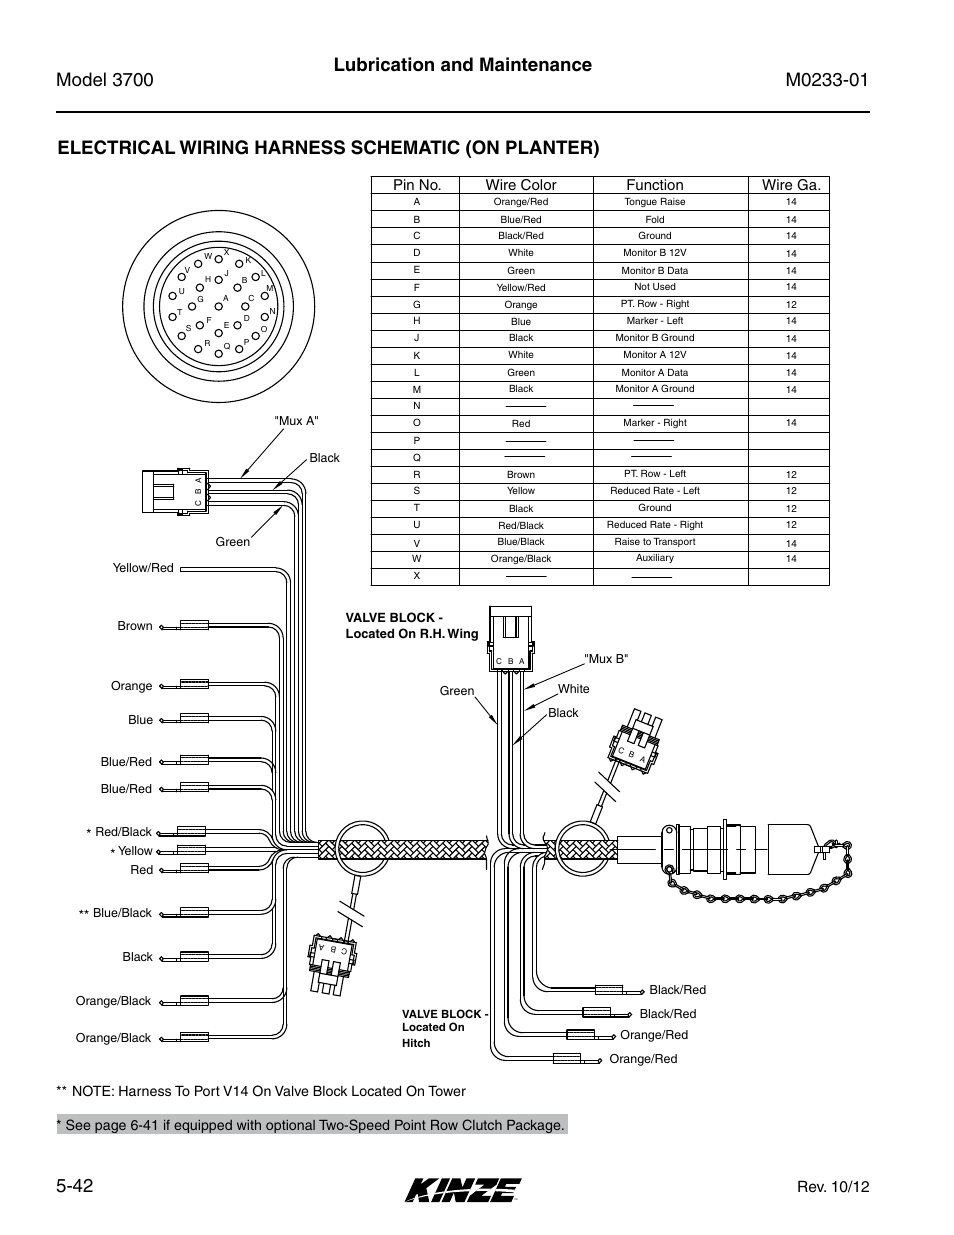 Electrical Wiring Harness Schematic  On Planter   Rev  10